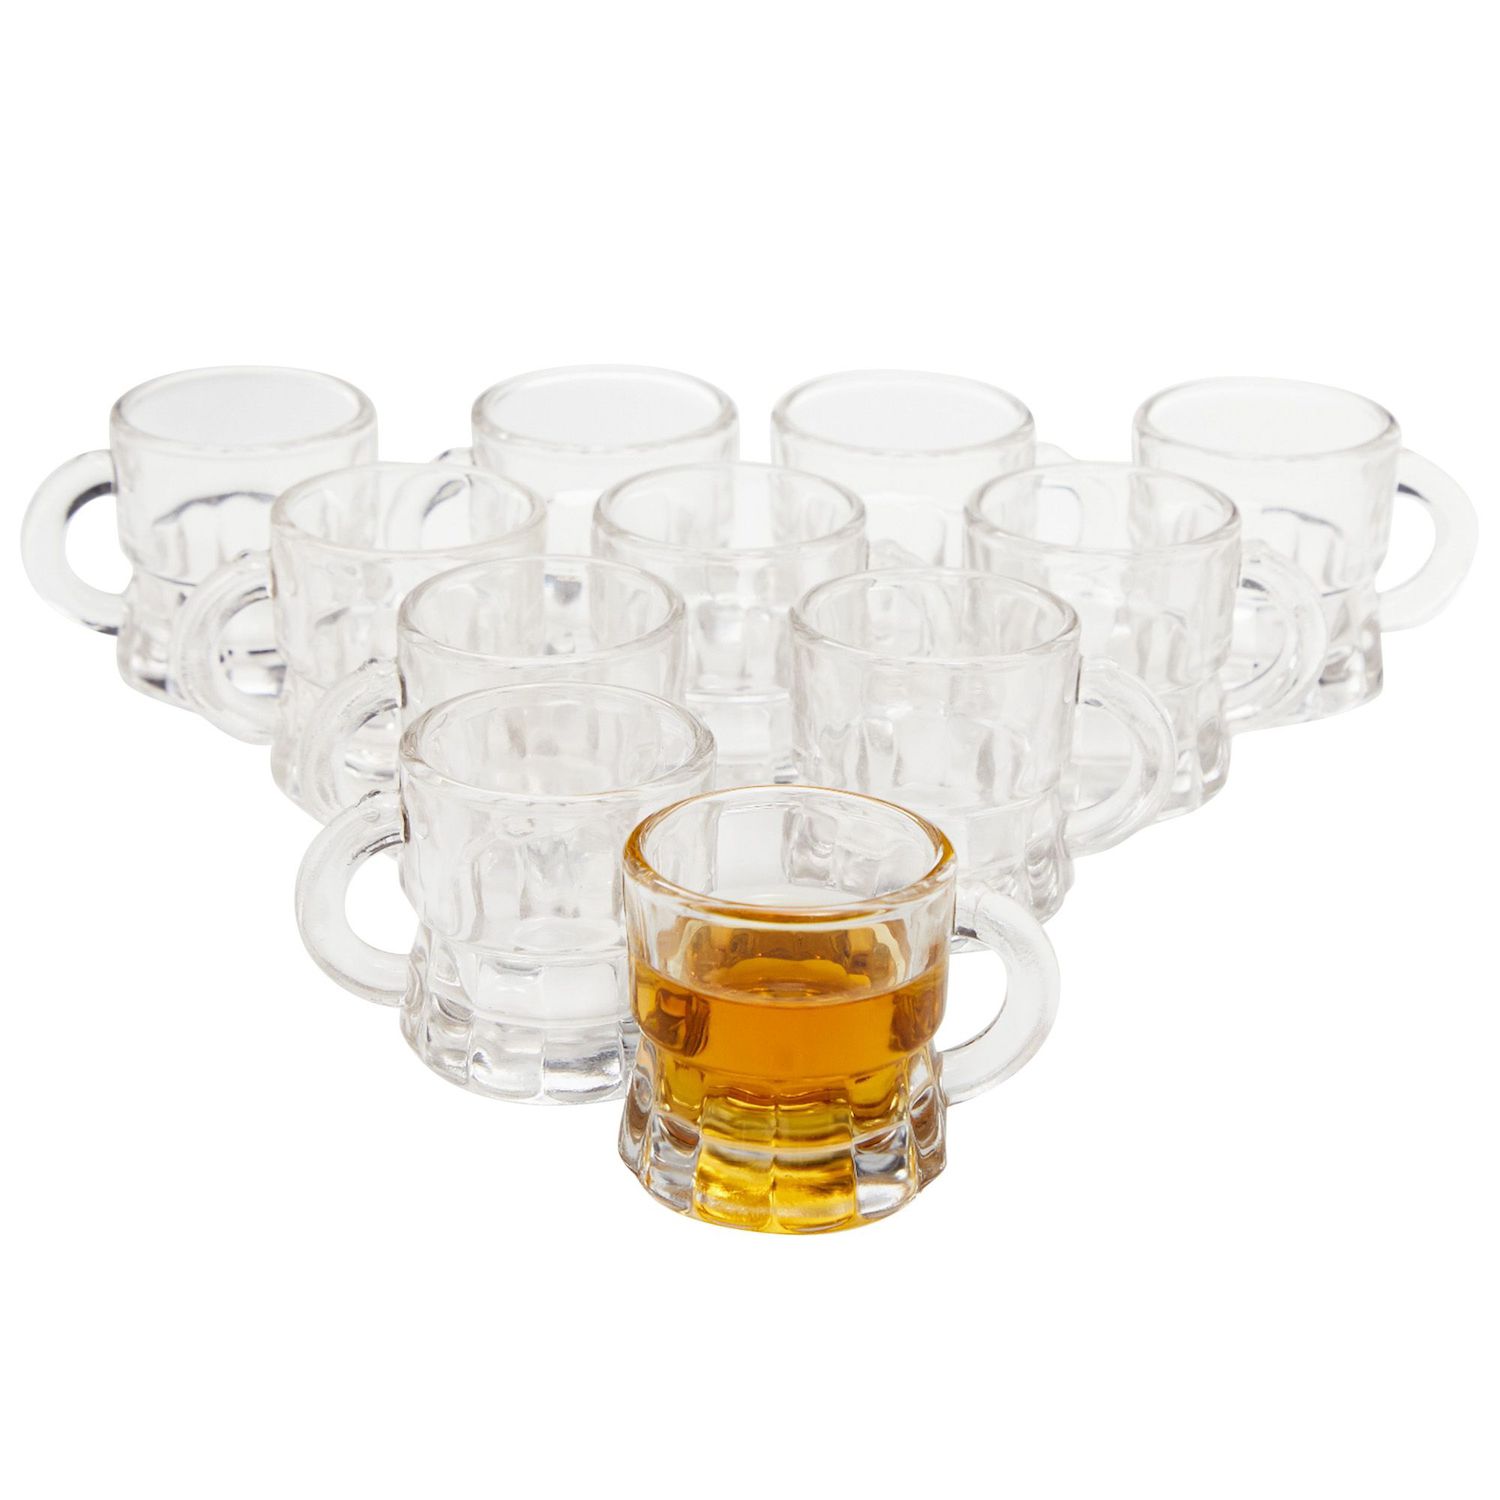 Meanplan Mini Beer Mugs Bulk Shot Glasses Beer Glasses Set 1oz Small Clear  Beer Stein with Handles M…See more Meanplan Mini Beer Mugs Bulk Shot